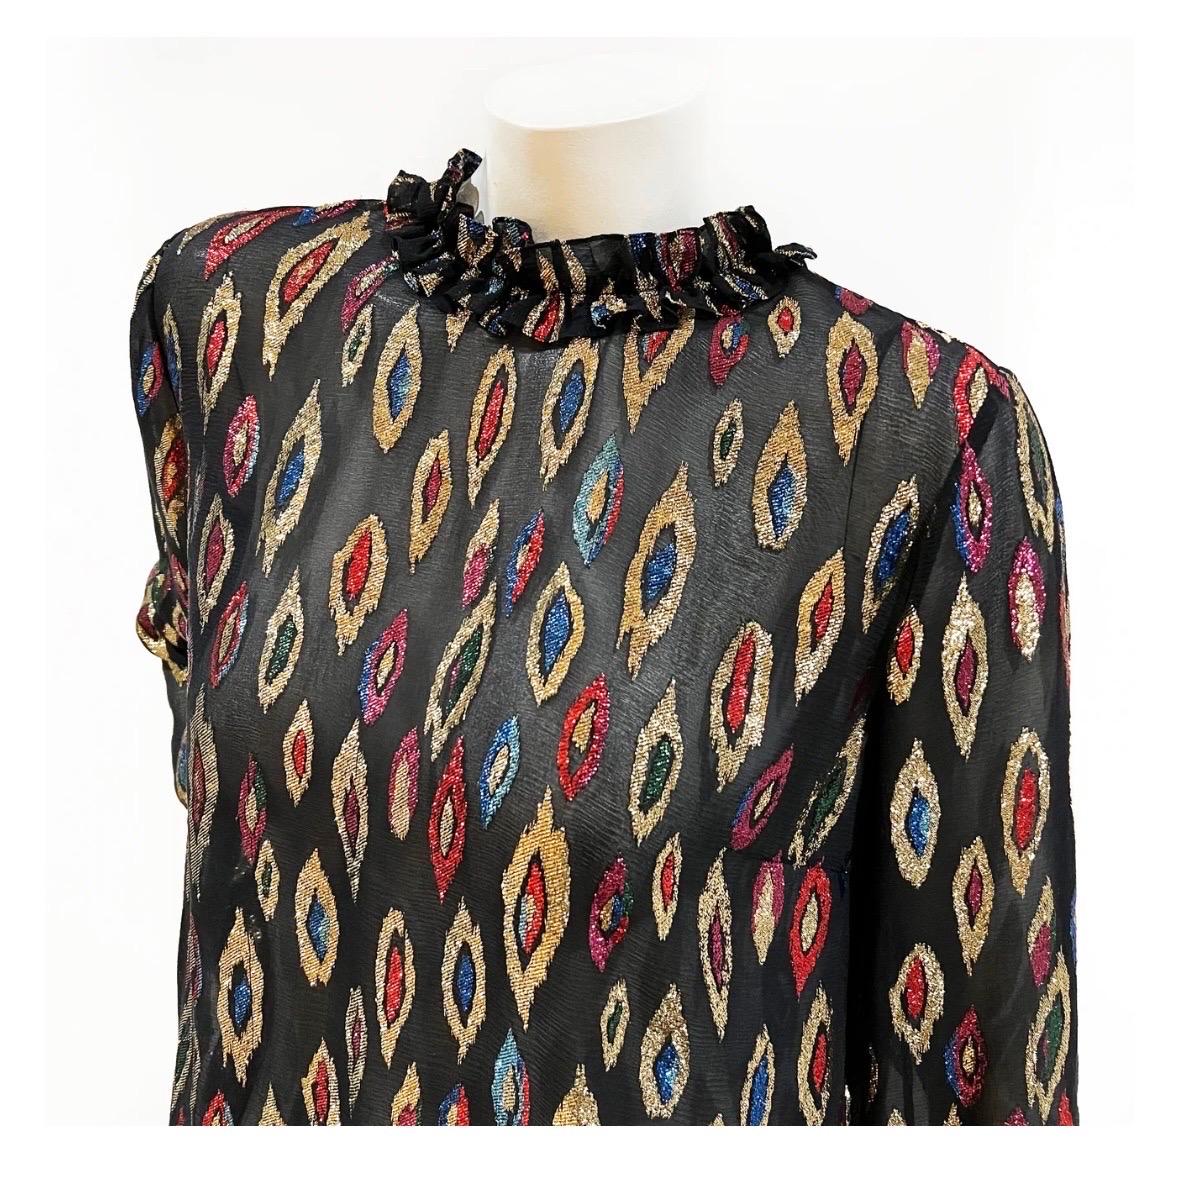 Peacock print blouse by Saint Laurent
Circa 2017
Made in Italty
Black with metallic gold/multicolor peacock feather print detail throughout
Long sleeve
Ruffle collar 
Gathered adjustable cuff ties
Button closure down the back of blouse 
Fabric